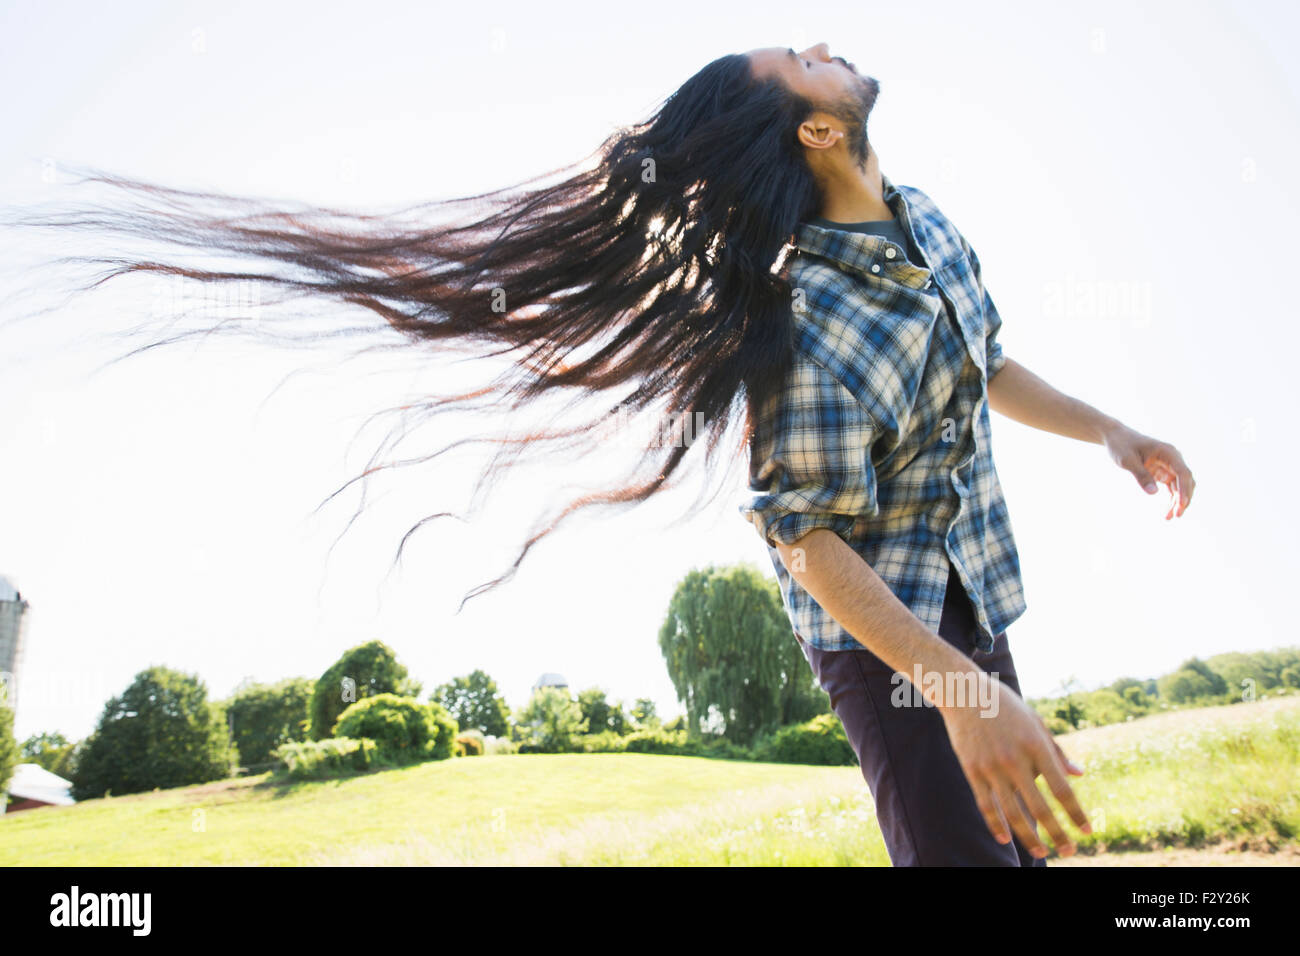 A young man letting down his very long dark hair and shaking his head to fan it out in the fresh air. Stock Photo